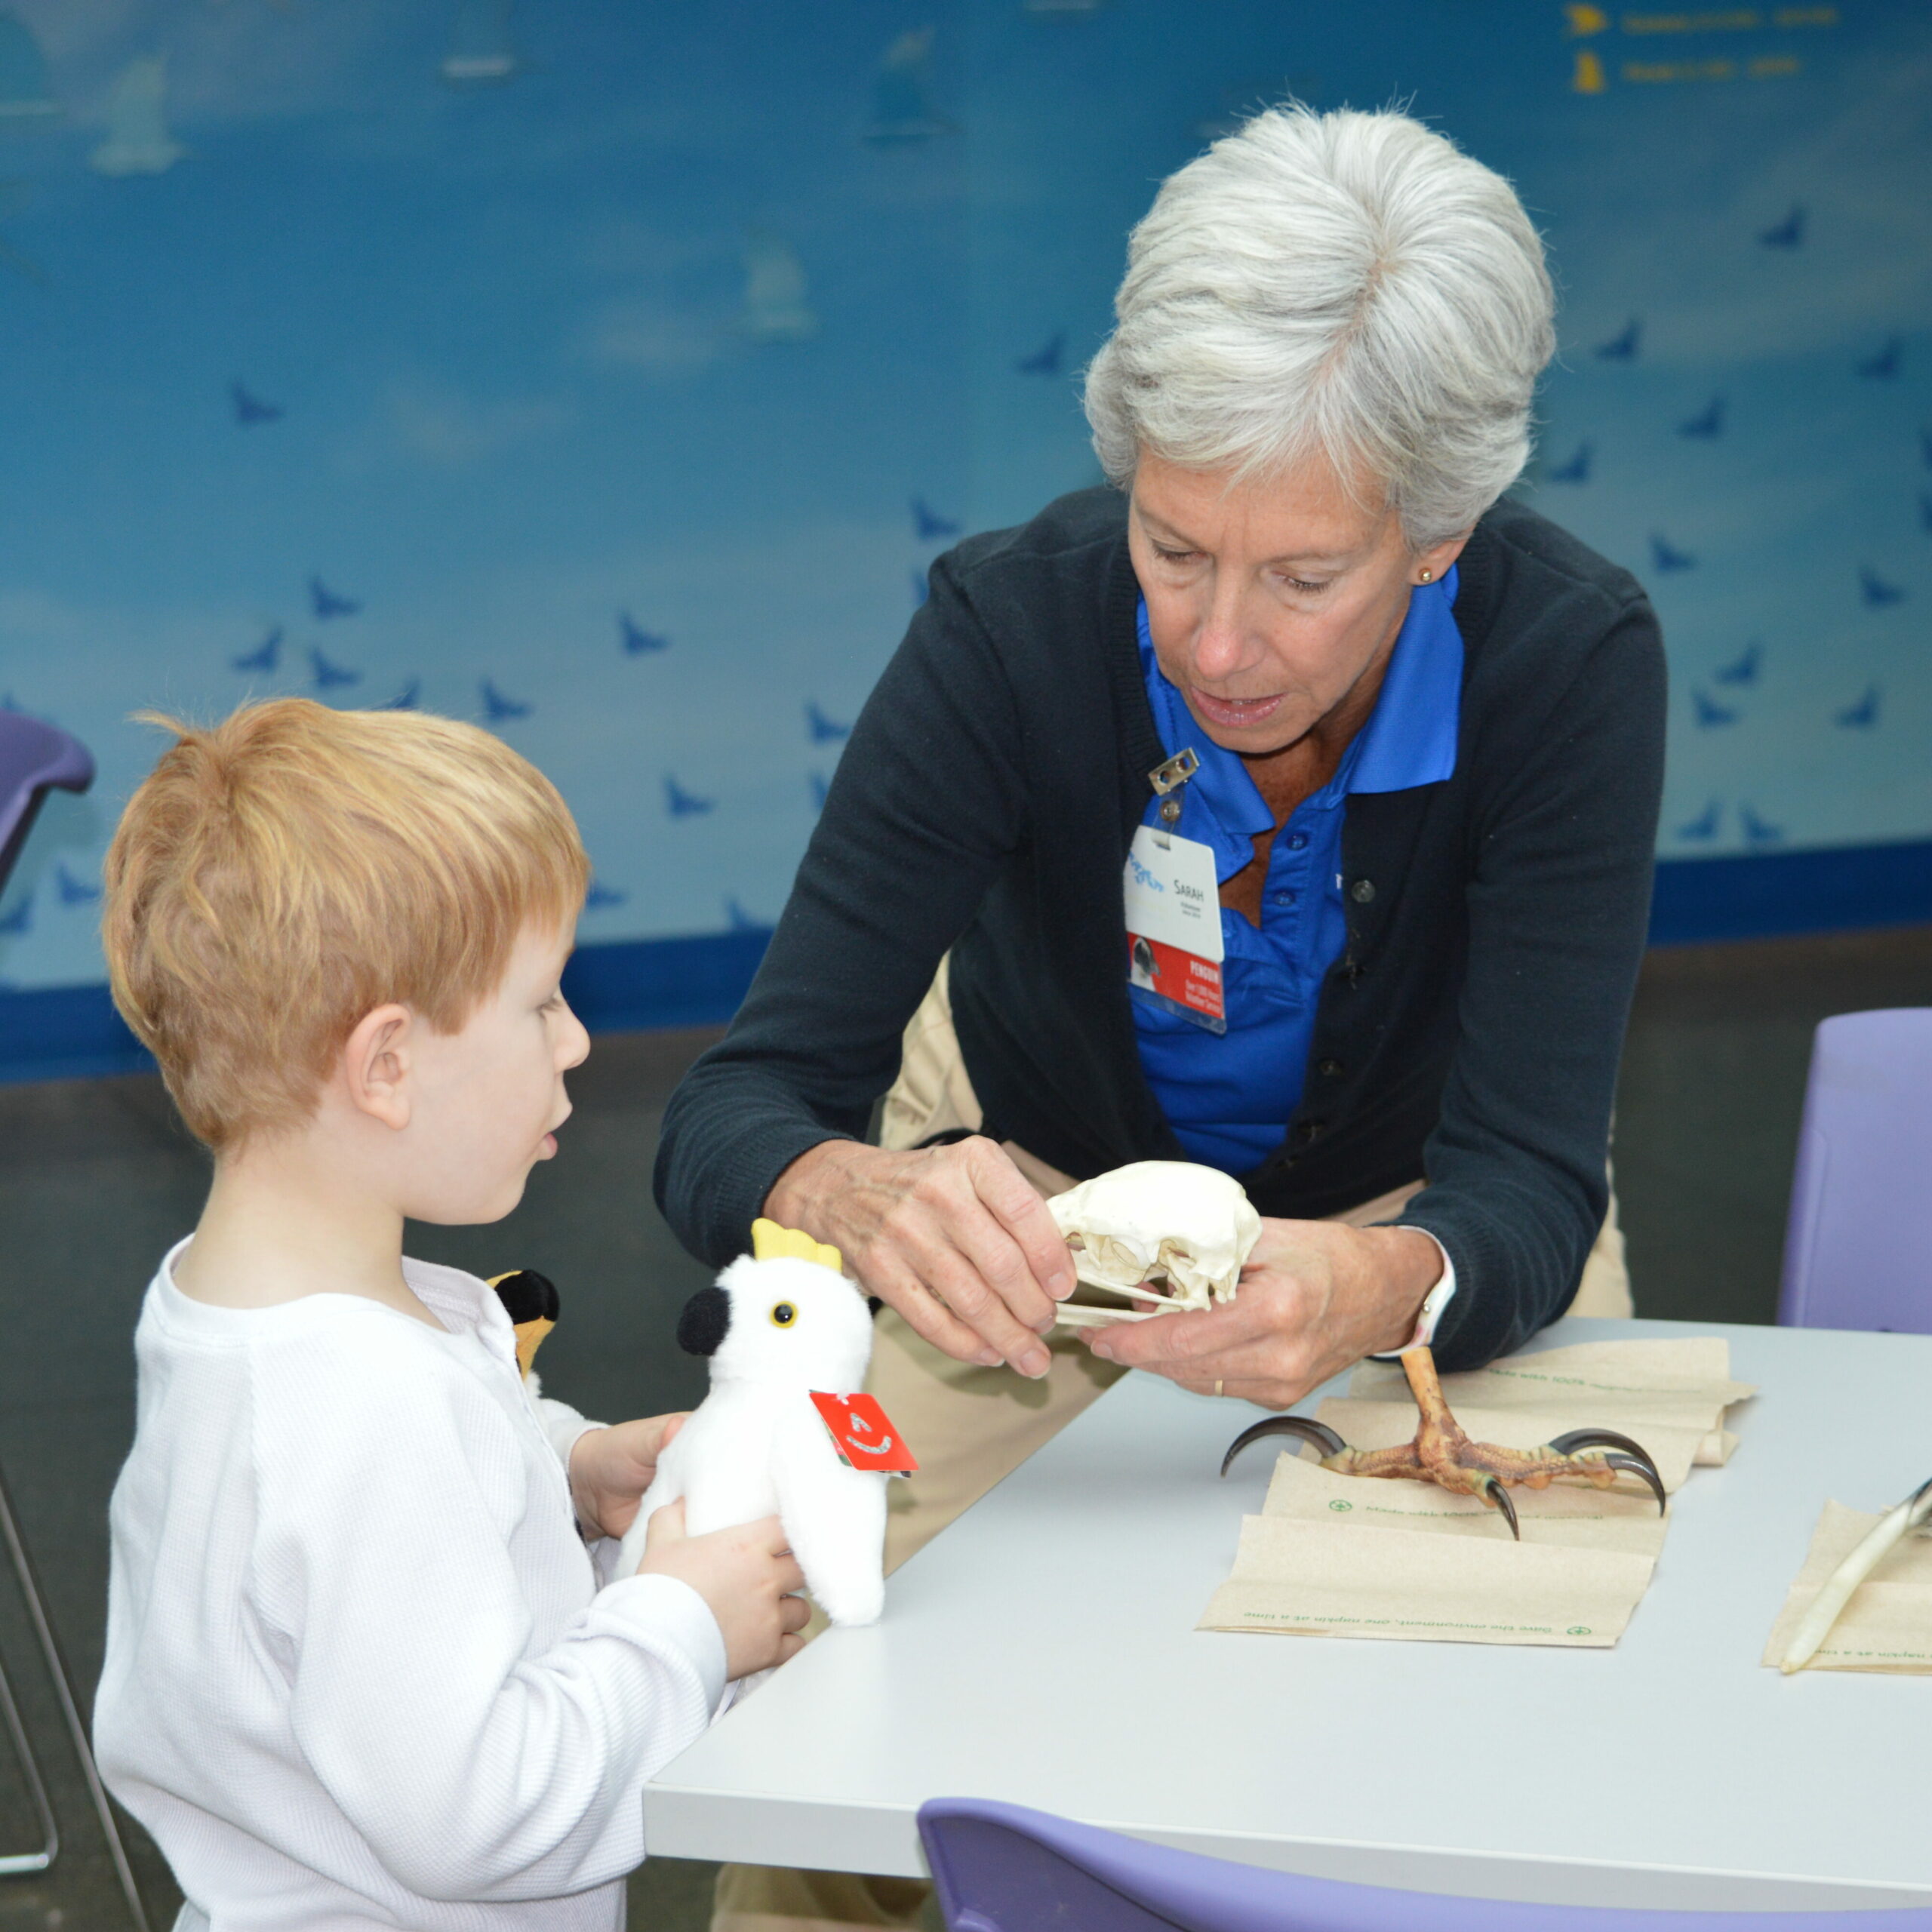 National Aviary expert teaching a young child about birds.